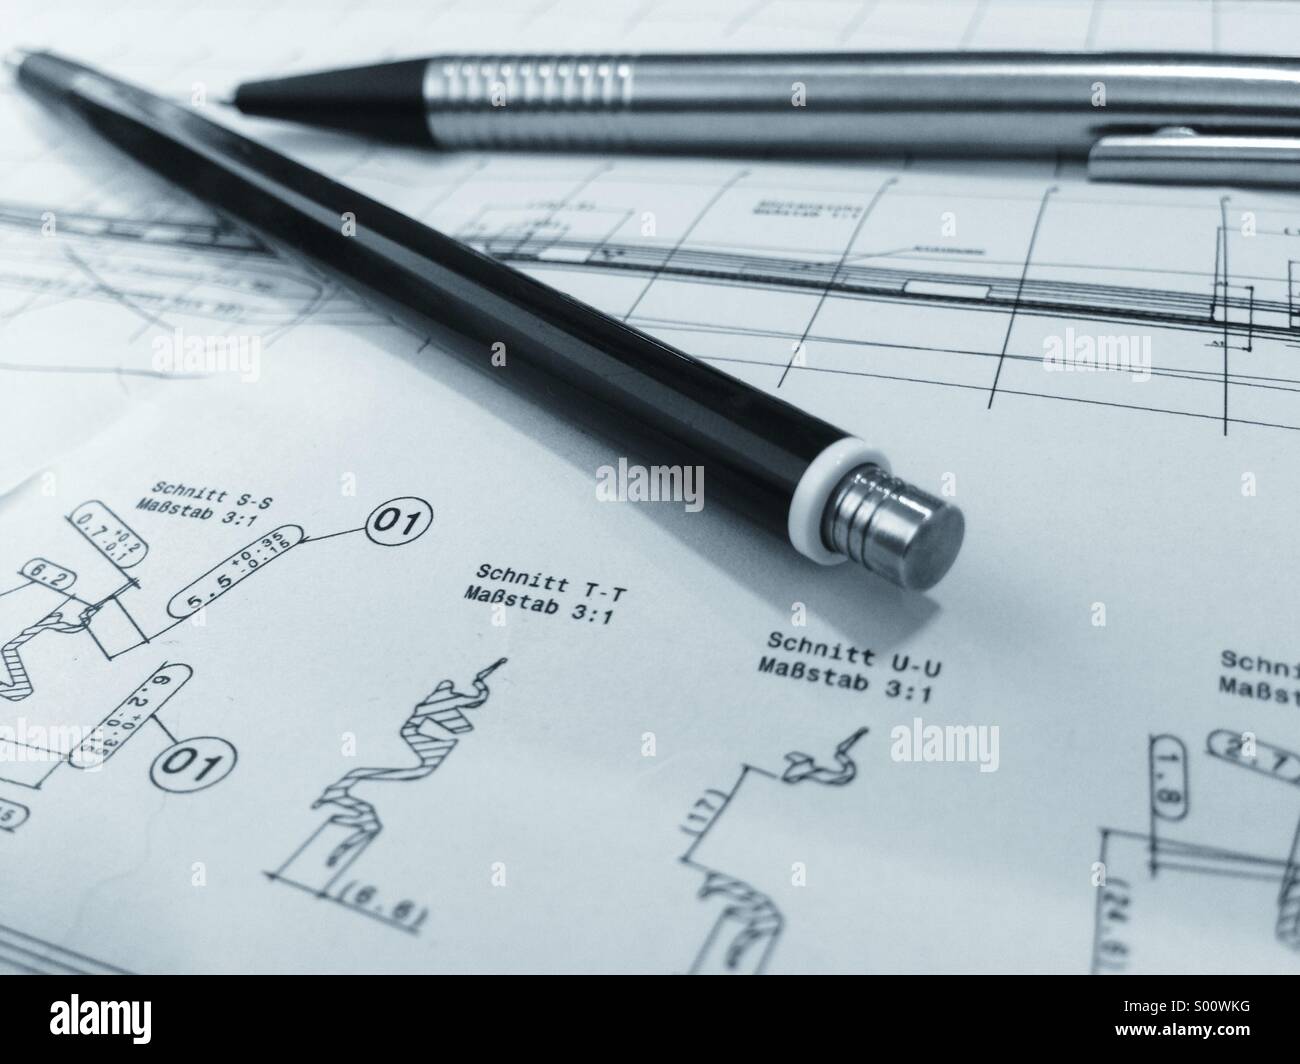 Engineering drawing with pencil and ballpen Stock Photo